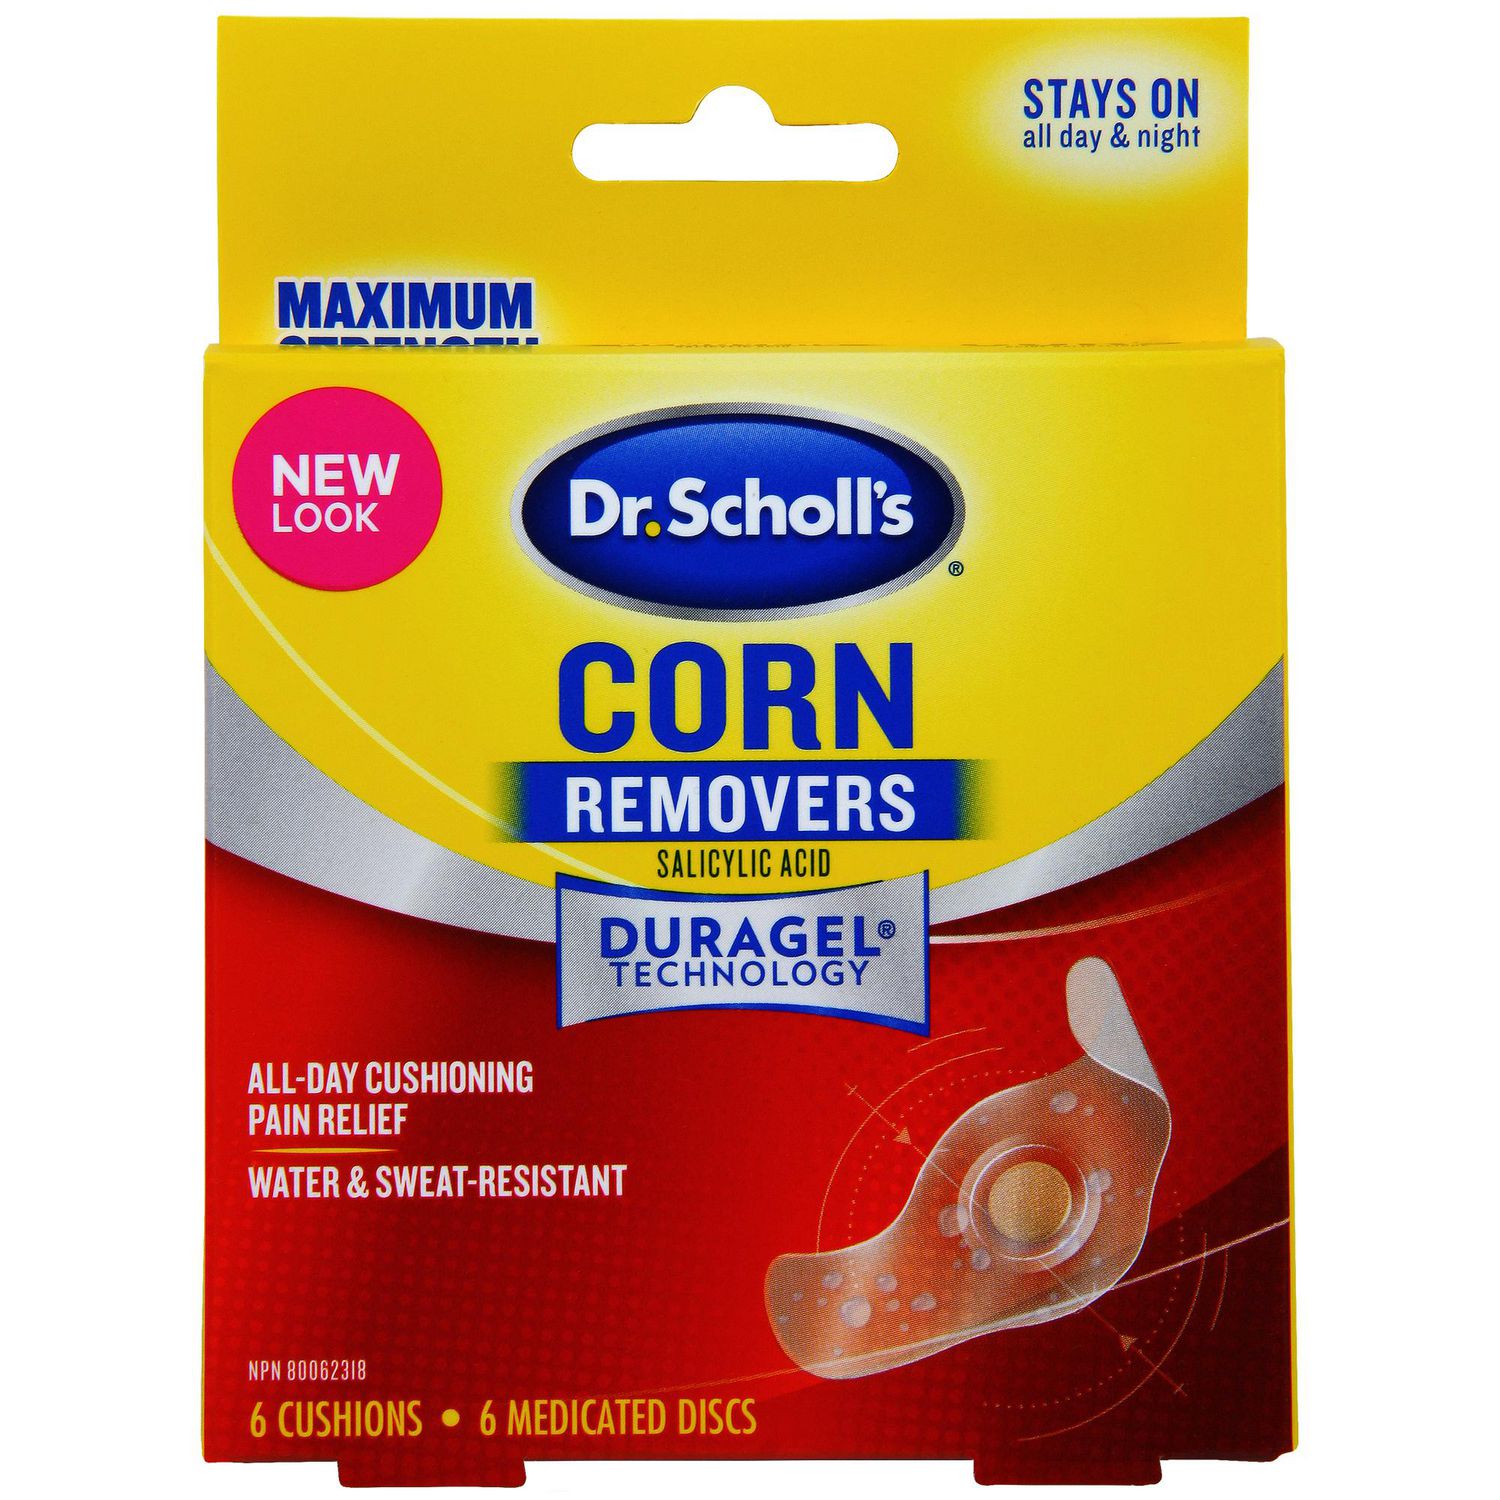 Dr Scholl #39 s Dr Scholl #39 s® Corn Removers with DURAGEL™ Technology